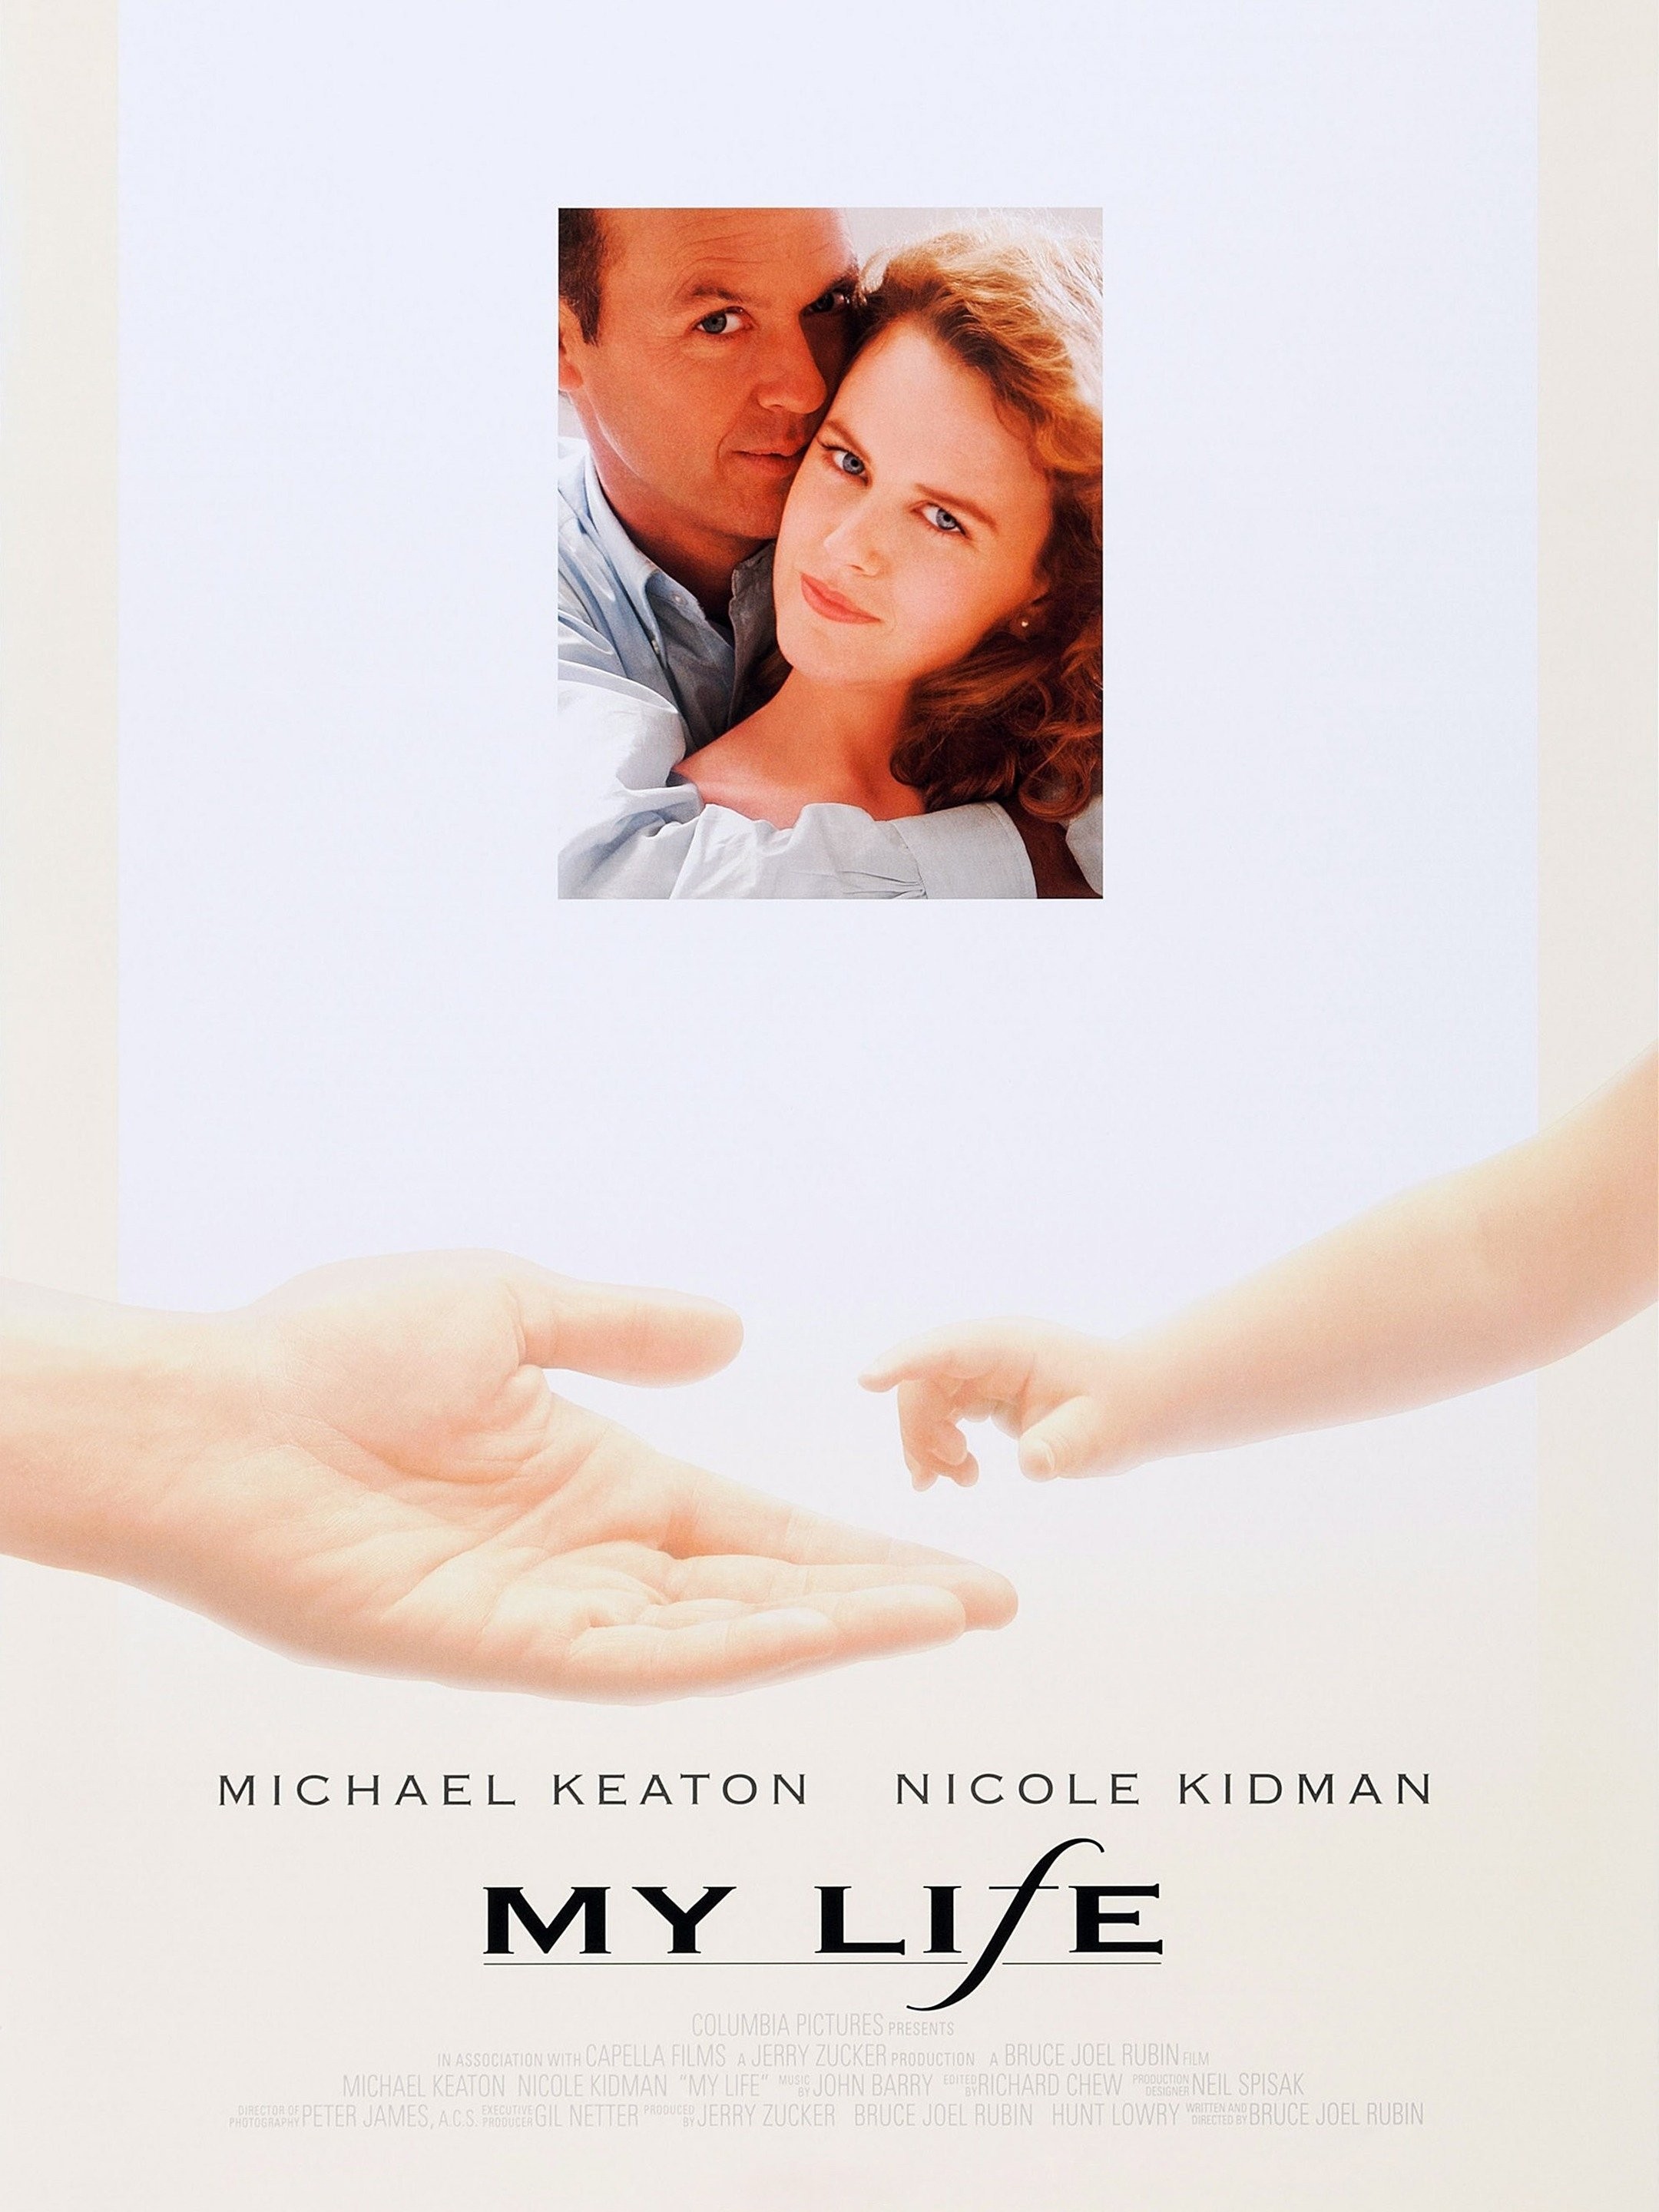 The Movie of My Life streaming: where to watch online?